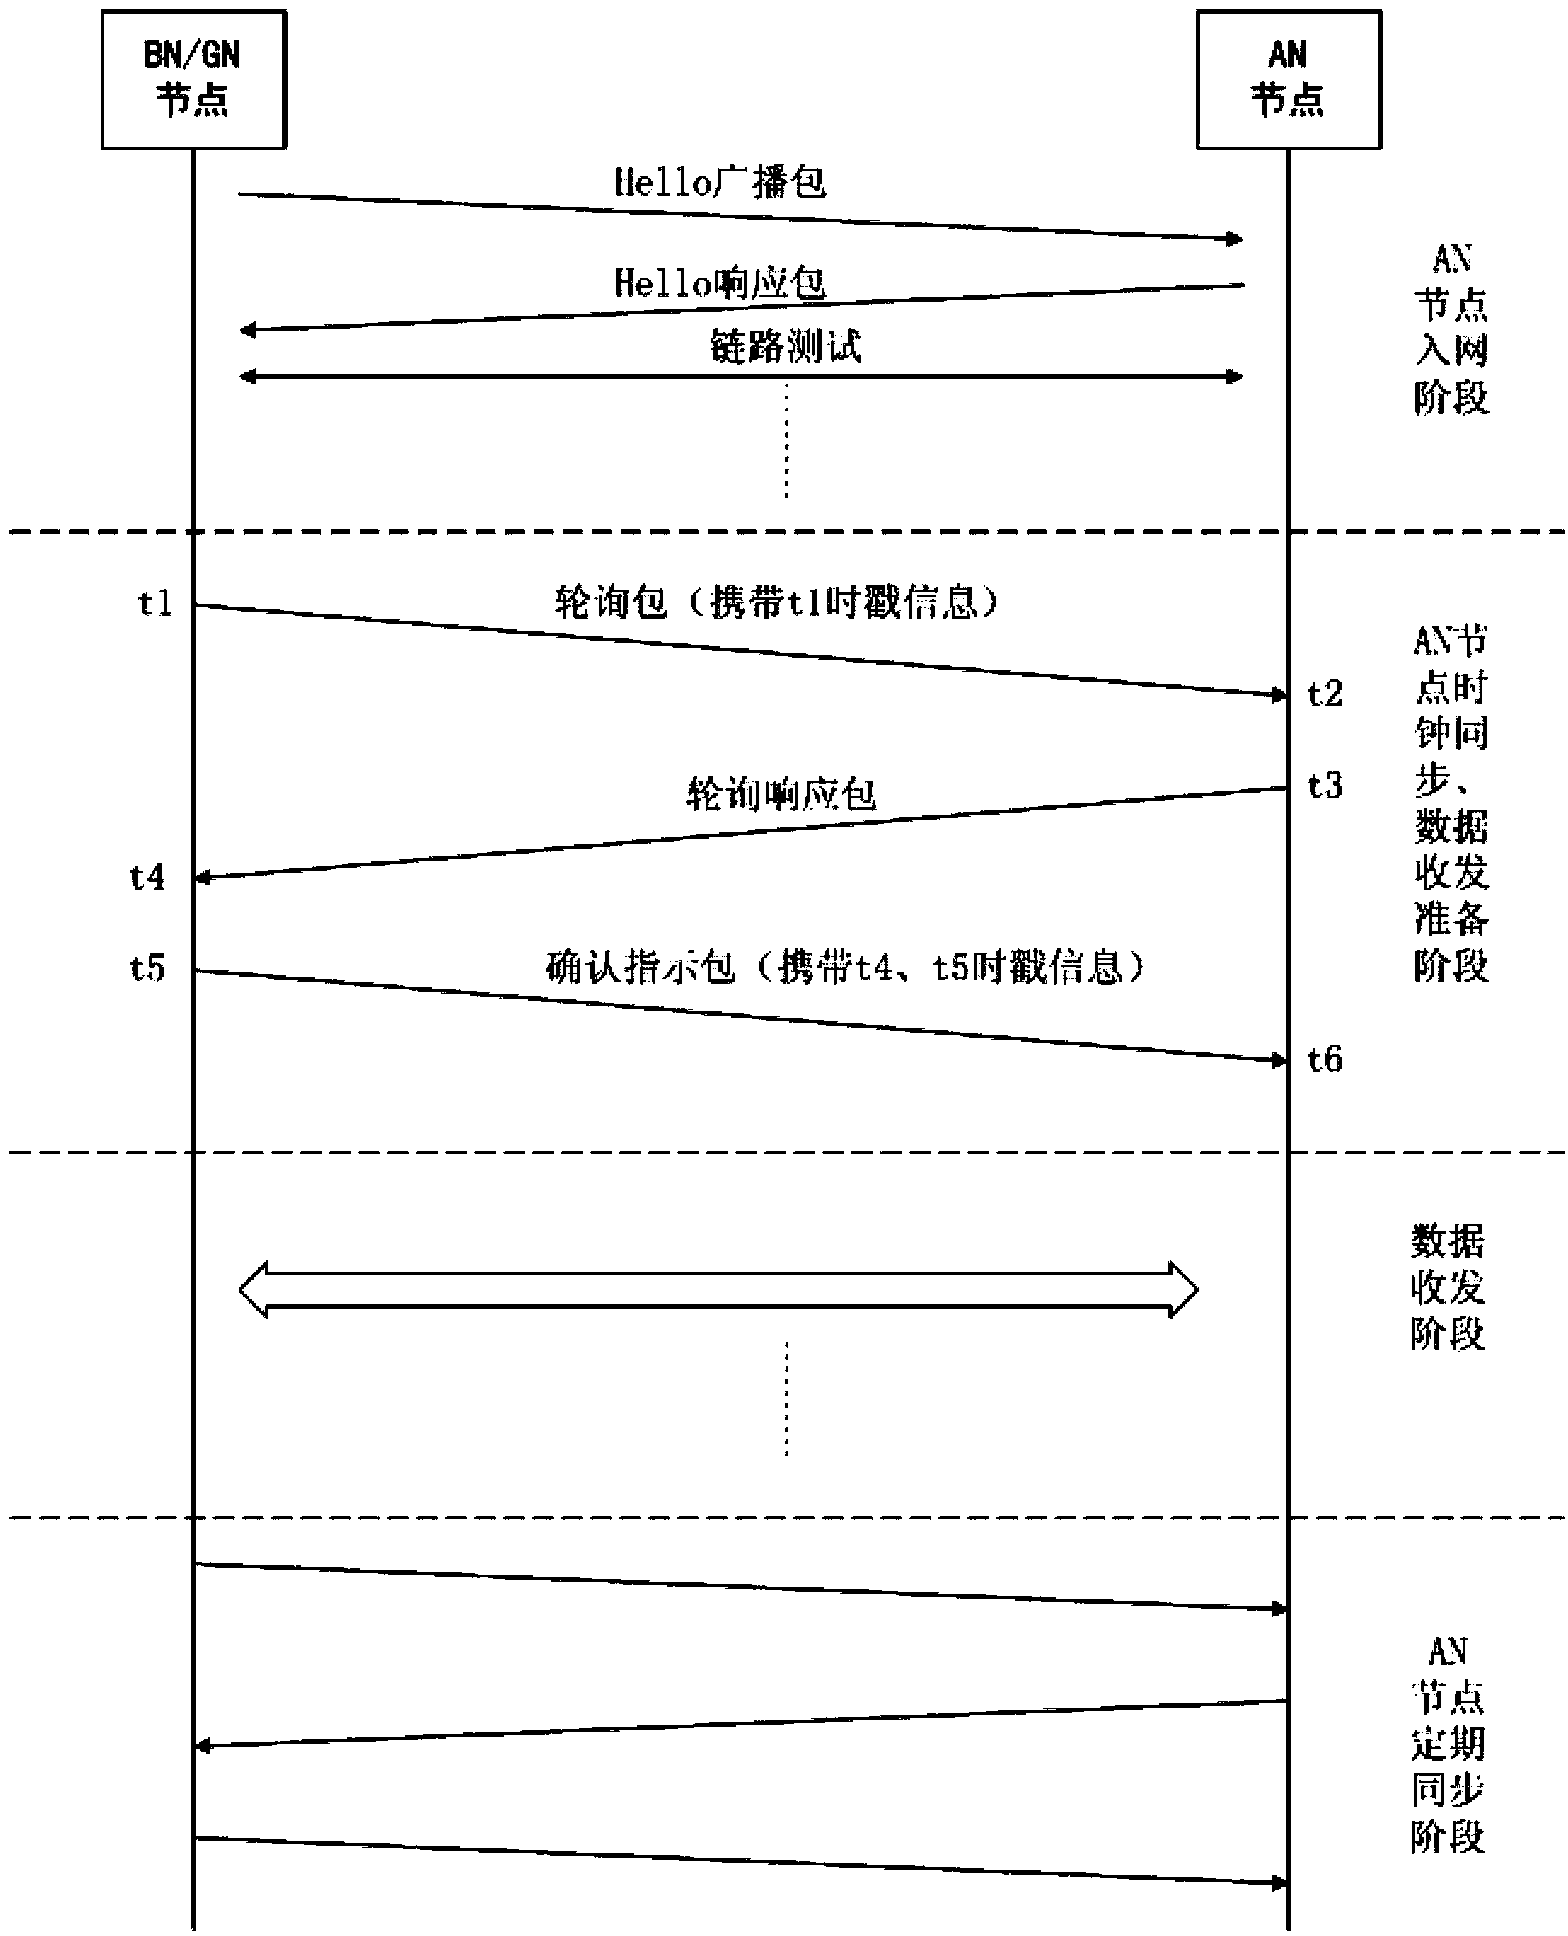 Method and system for synchronizing access node clock of synchronization Mesh network based on channel associated signaling